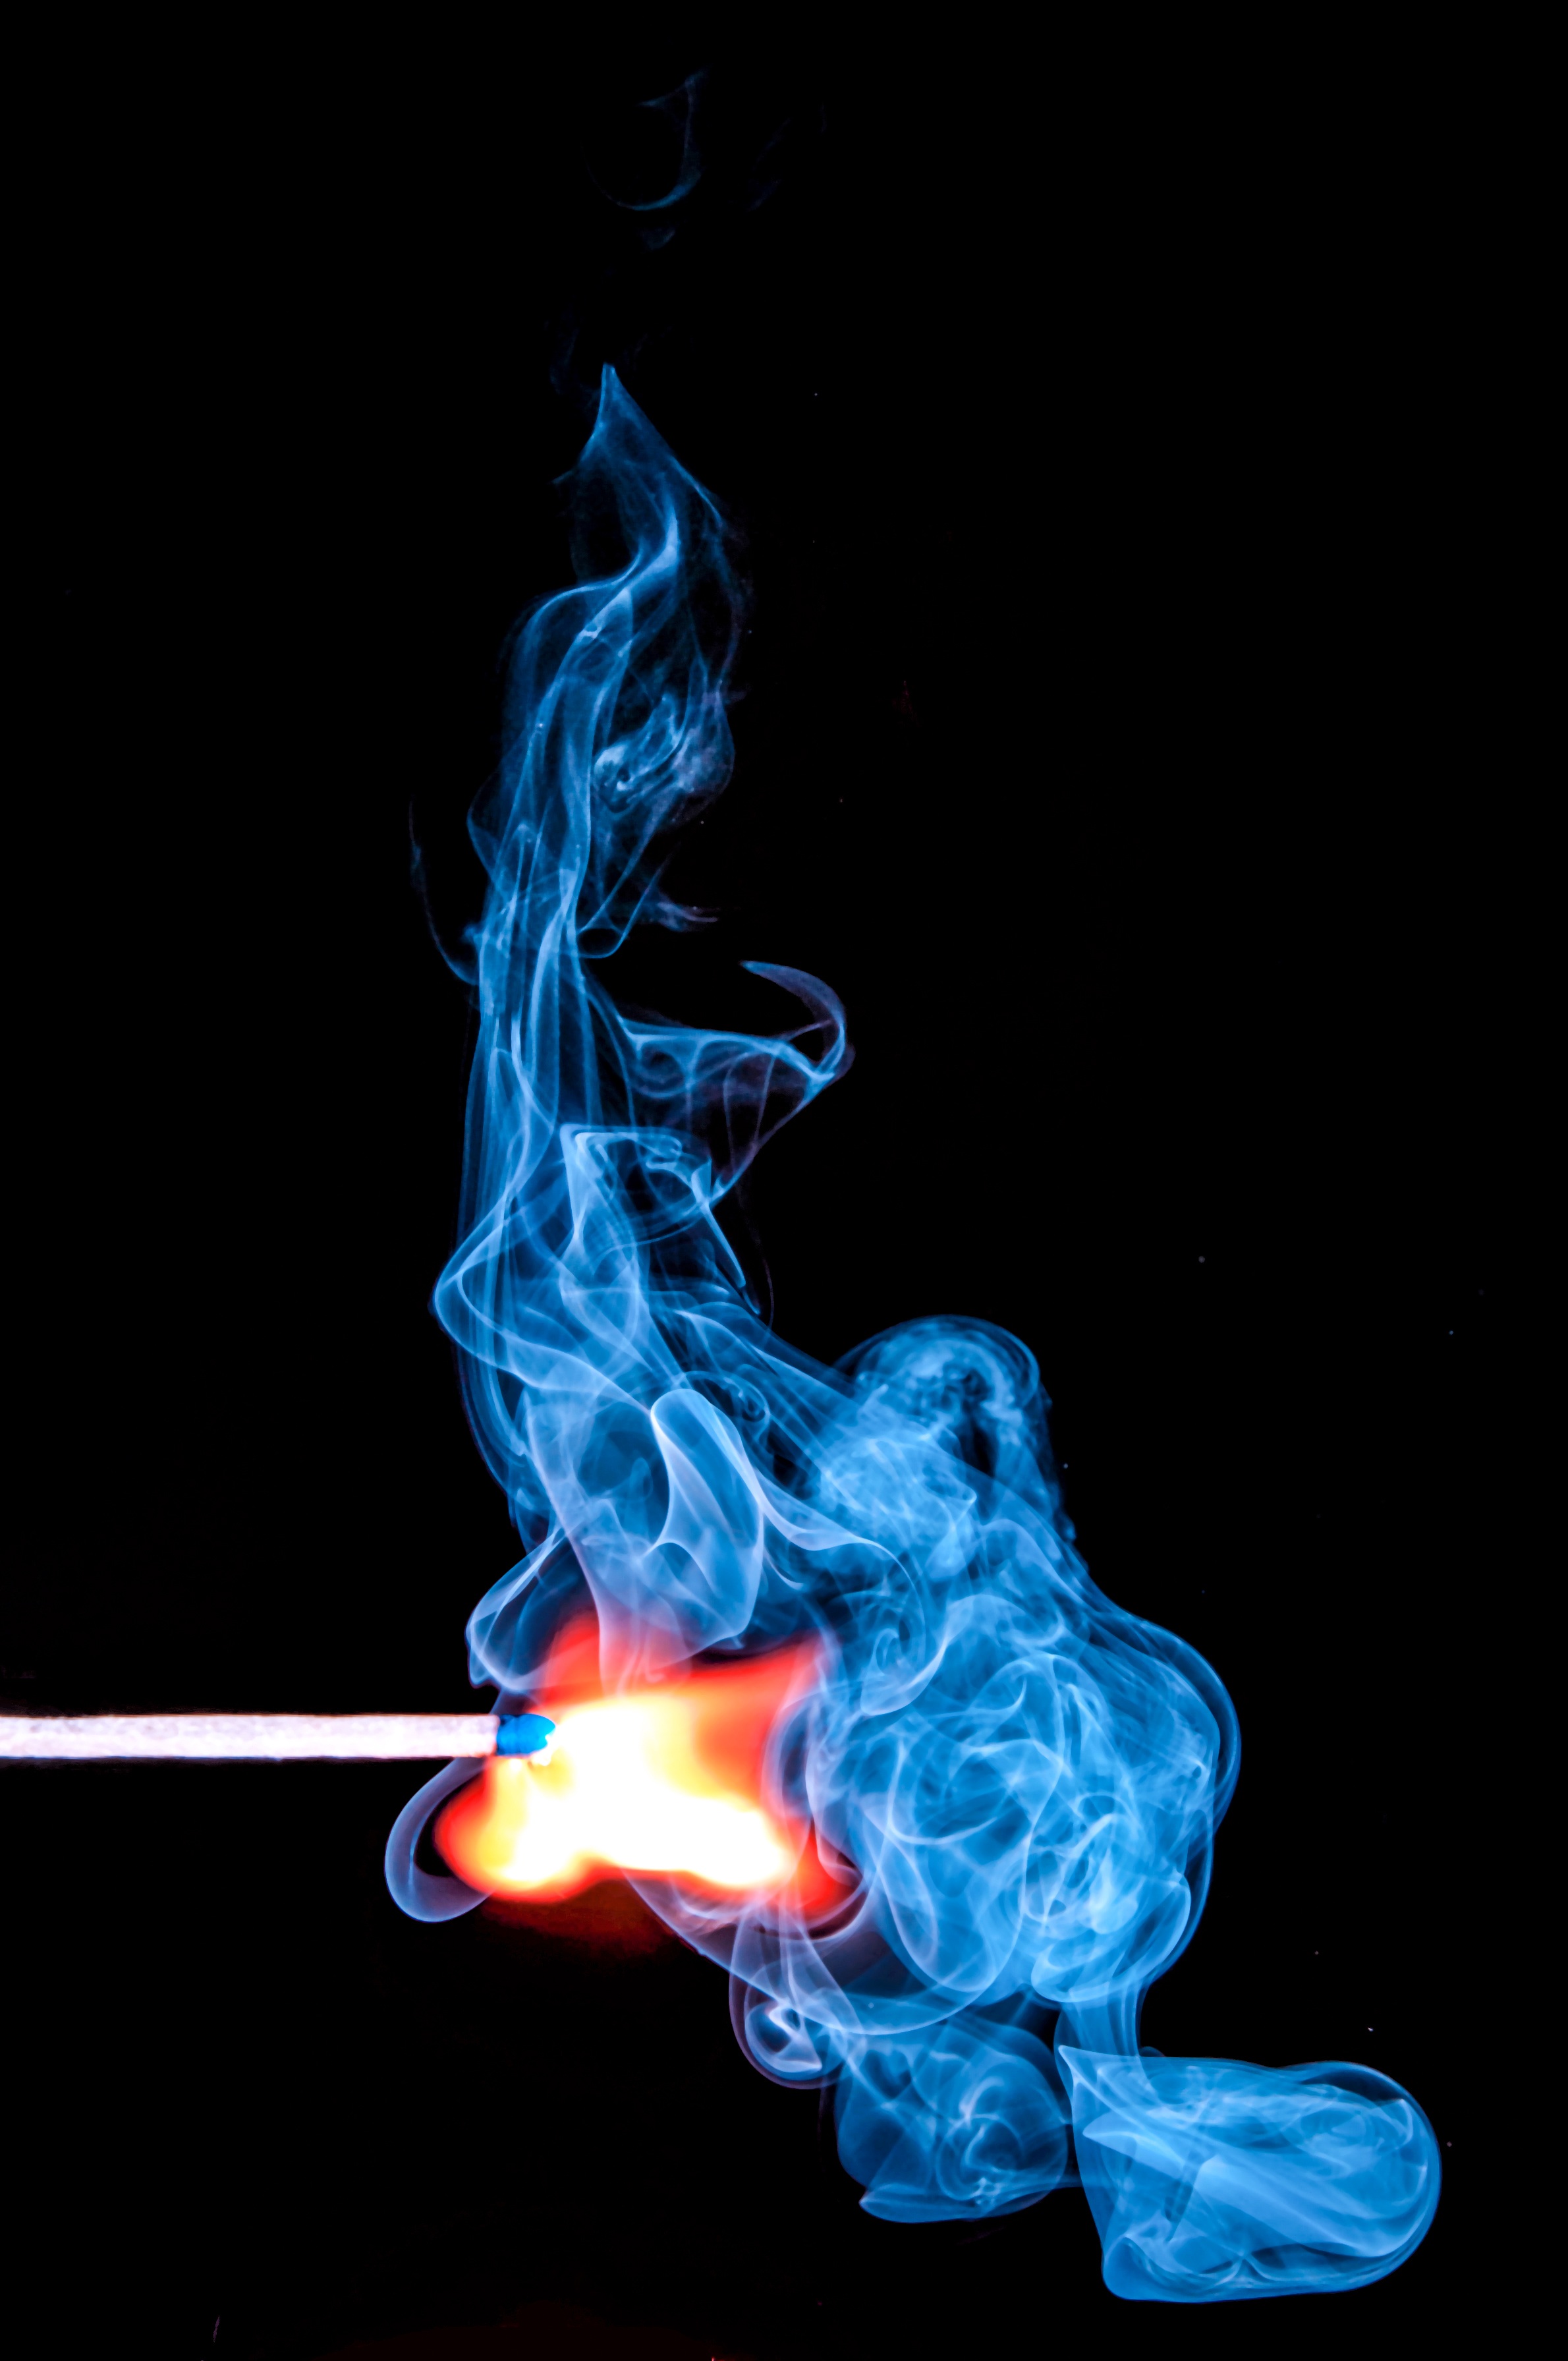 clots, match, smoke, miscellanea, miscellaneous, fire wallpapers for tablet